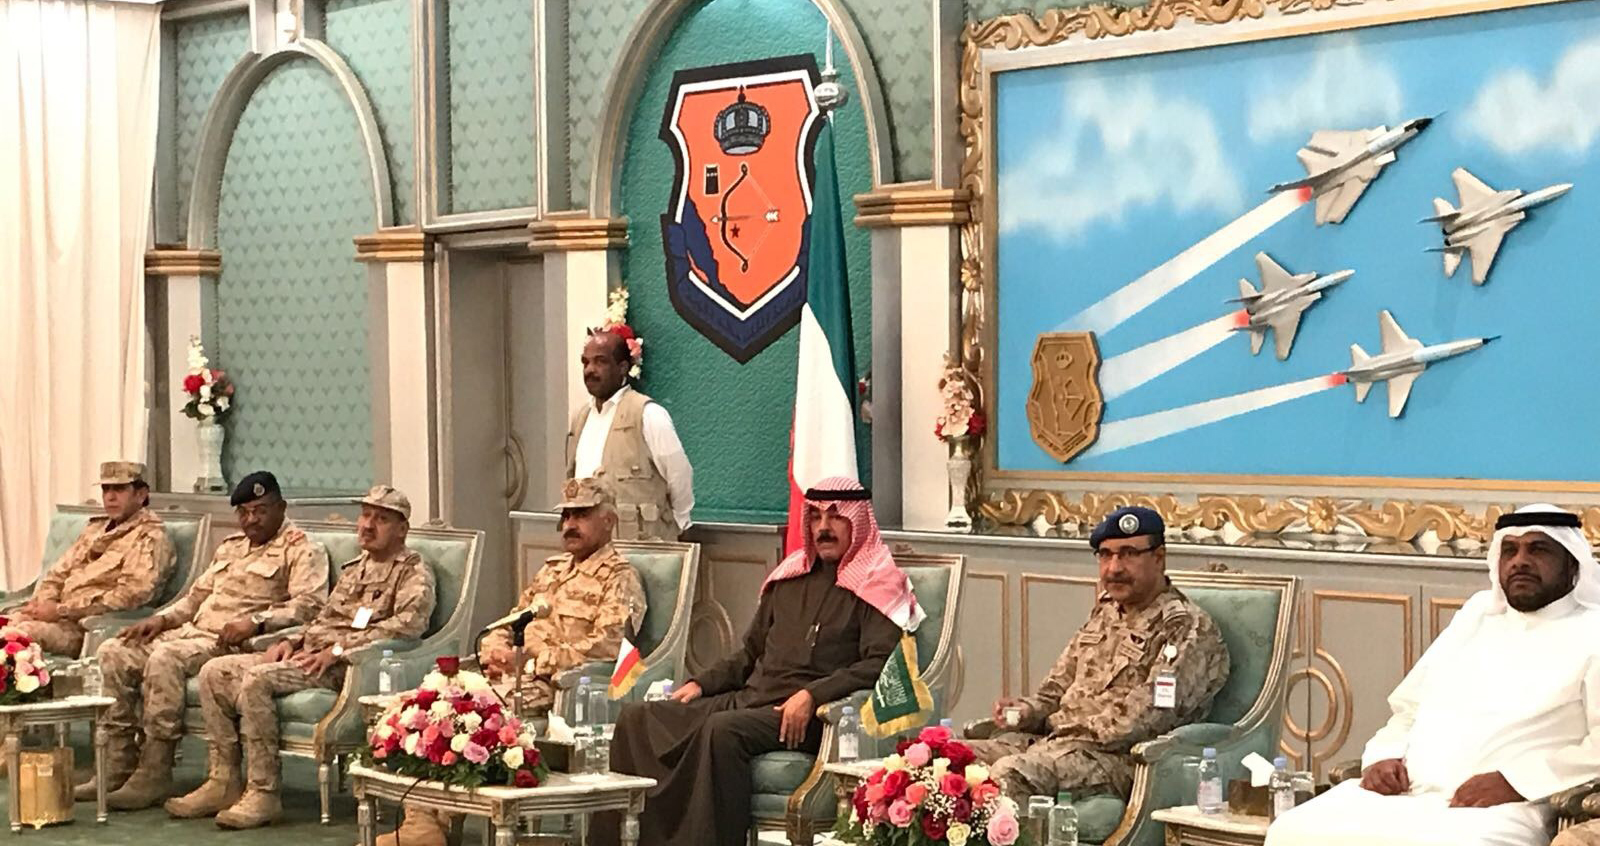 Deputy Prime Minister and Defence Minister Sheikh Mohammad Al-Khaled Al-Hamad Al-Sabah visits the troops stationed in the southwestern Saudi cities of Jazan and Khamis Mushait